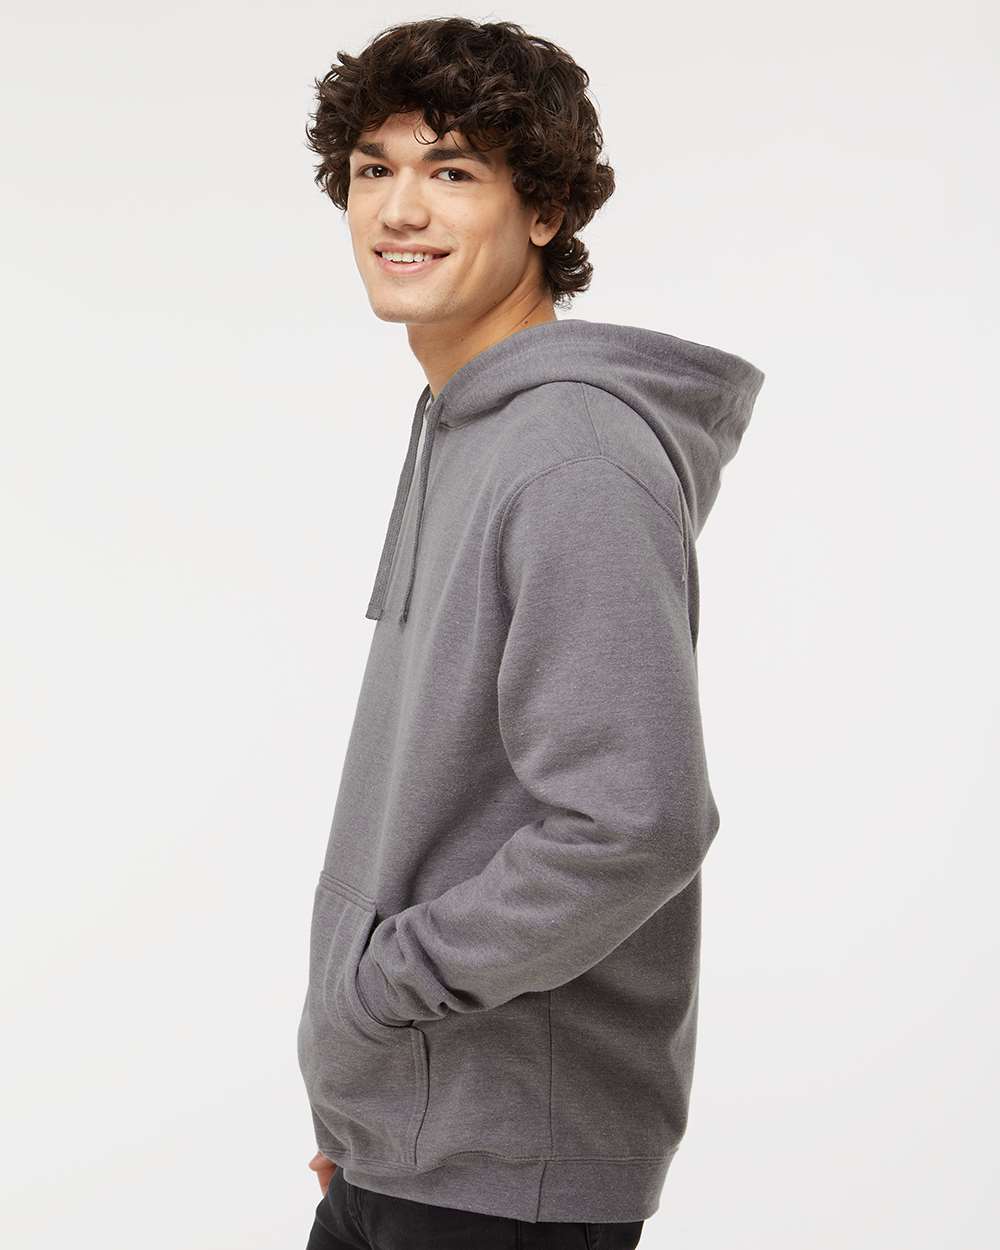 M&O Unisex Pullover Hoodie 3320 #colormdl_Heather Grey